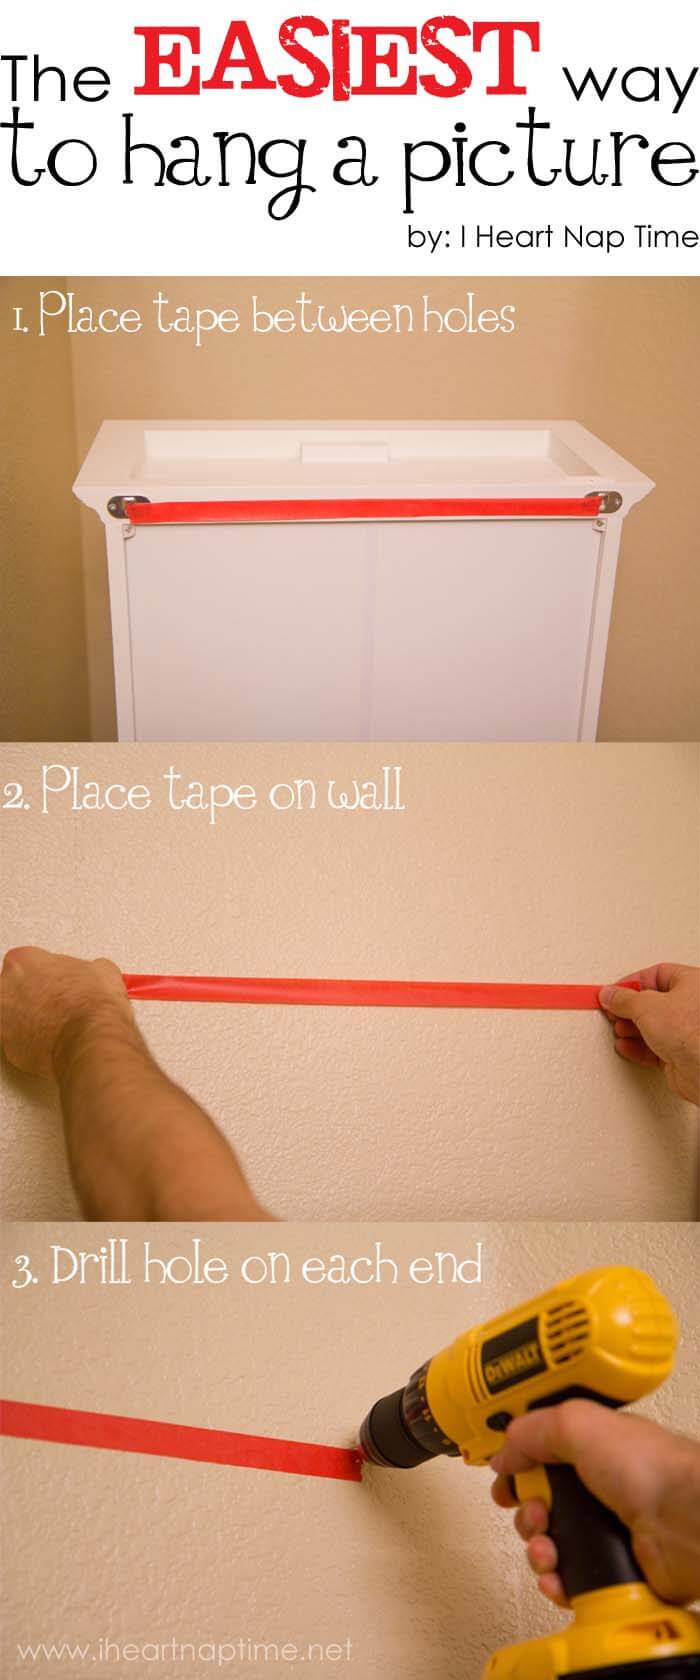 TIP Easiest way to hang a picture